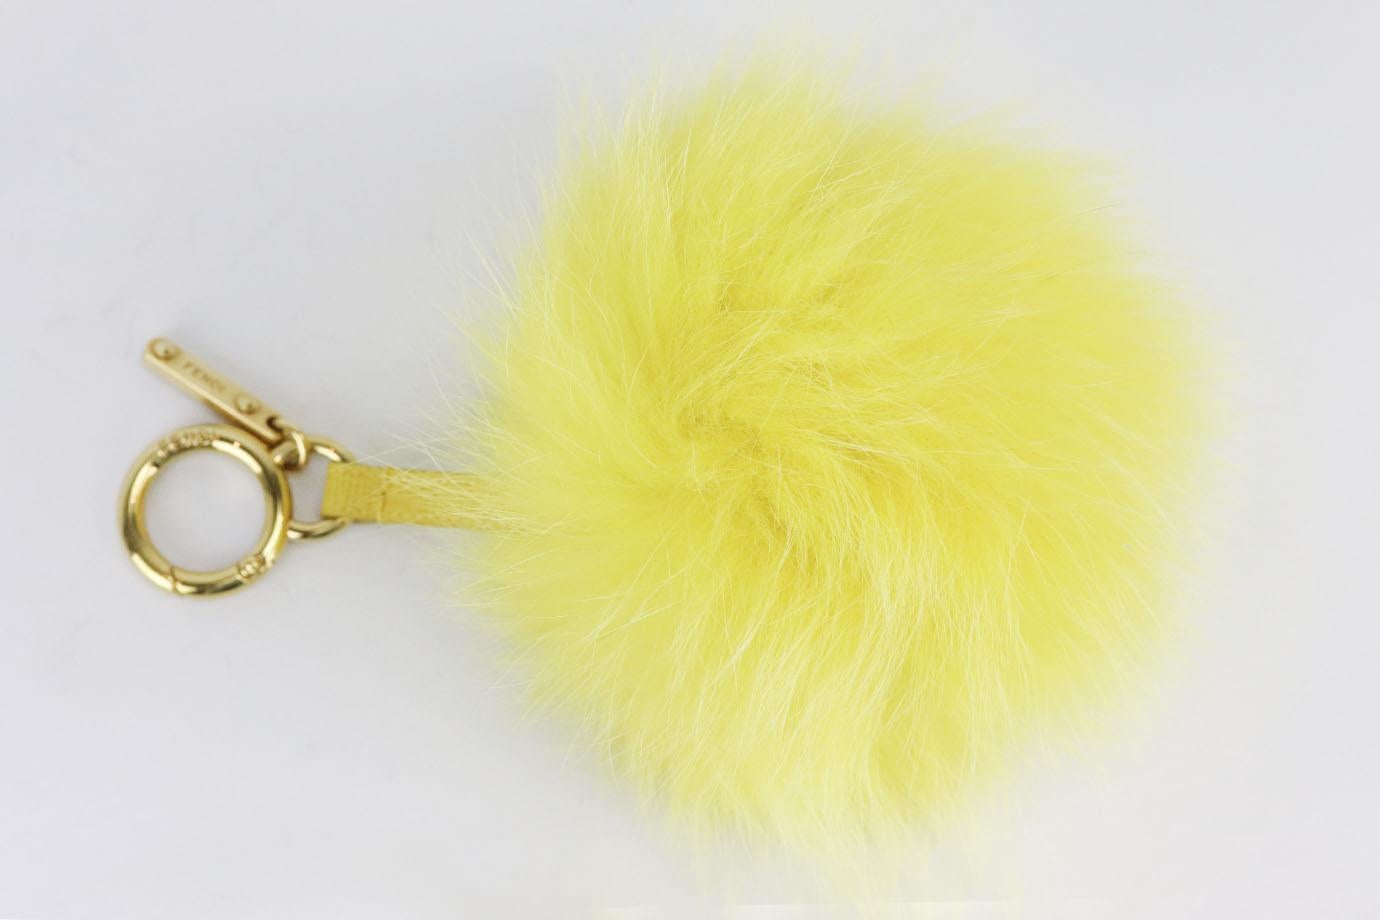 Fendi heart fox fur and leather bag charm. Red and pink. Lobster clasp fastening at top. Does not come with dustbag or box. Height: 9 in. Width: 5.5 in
